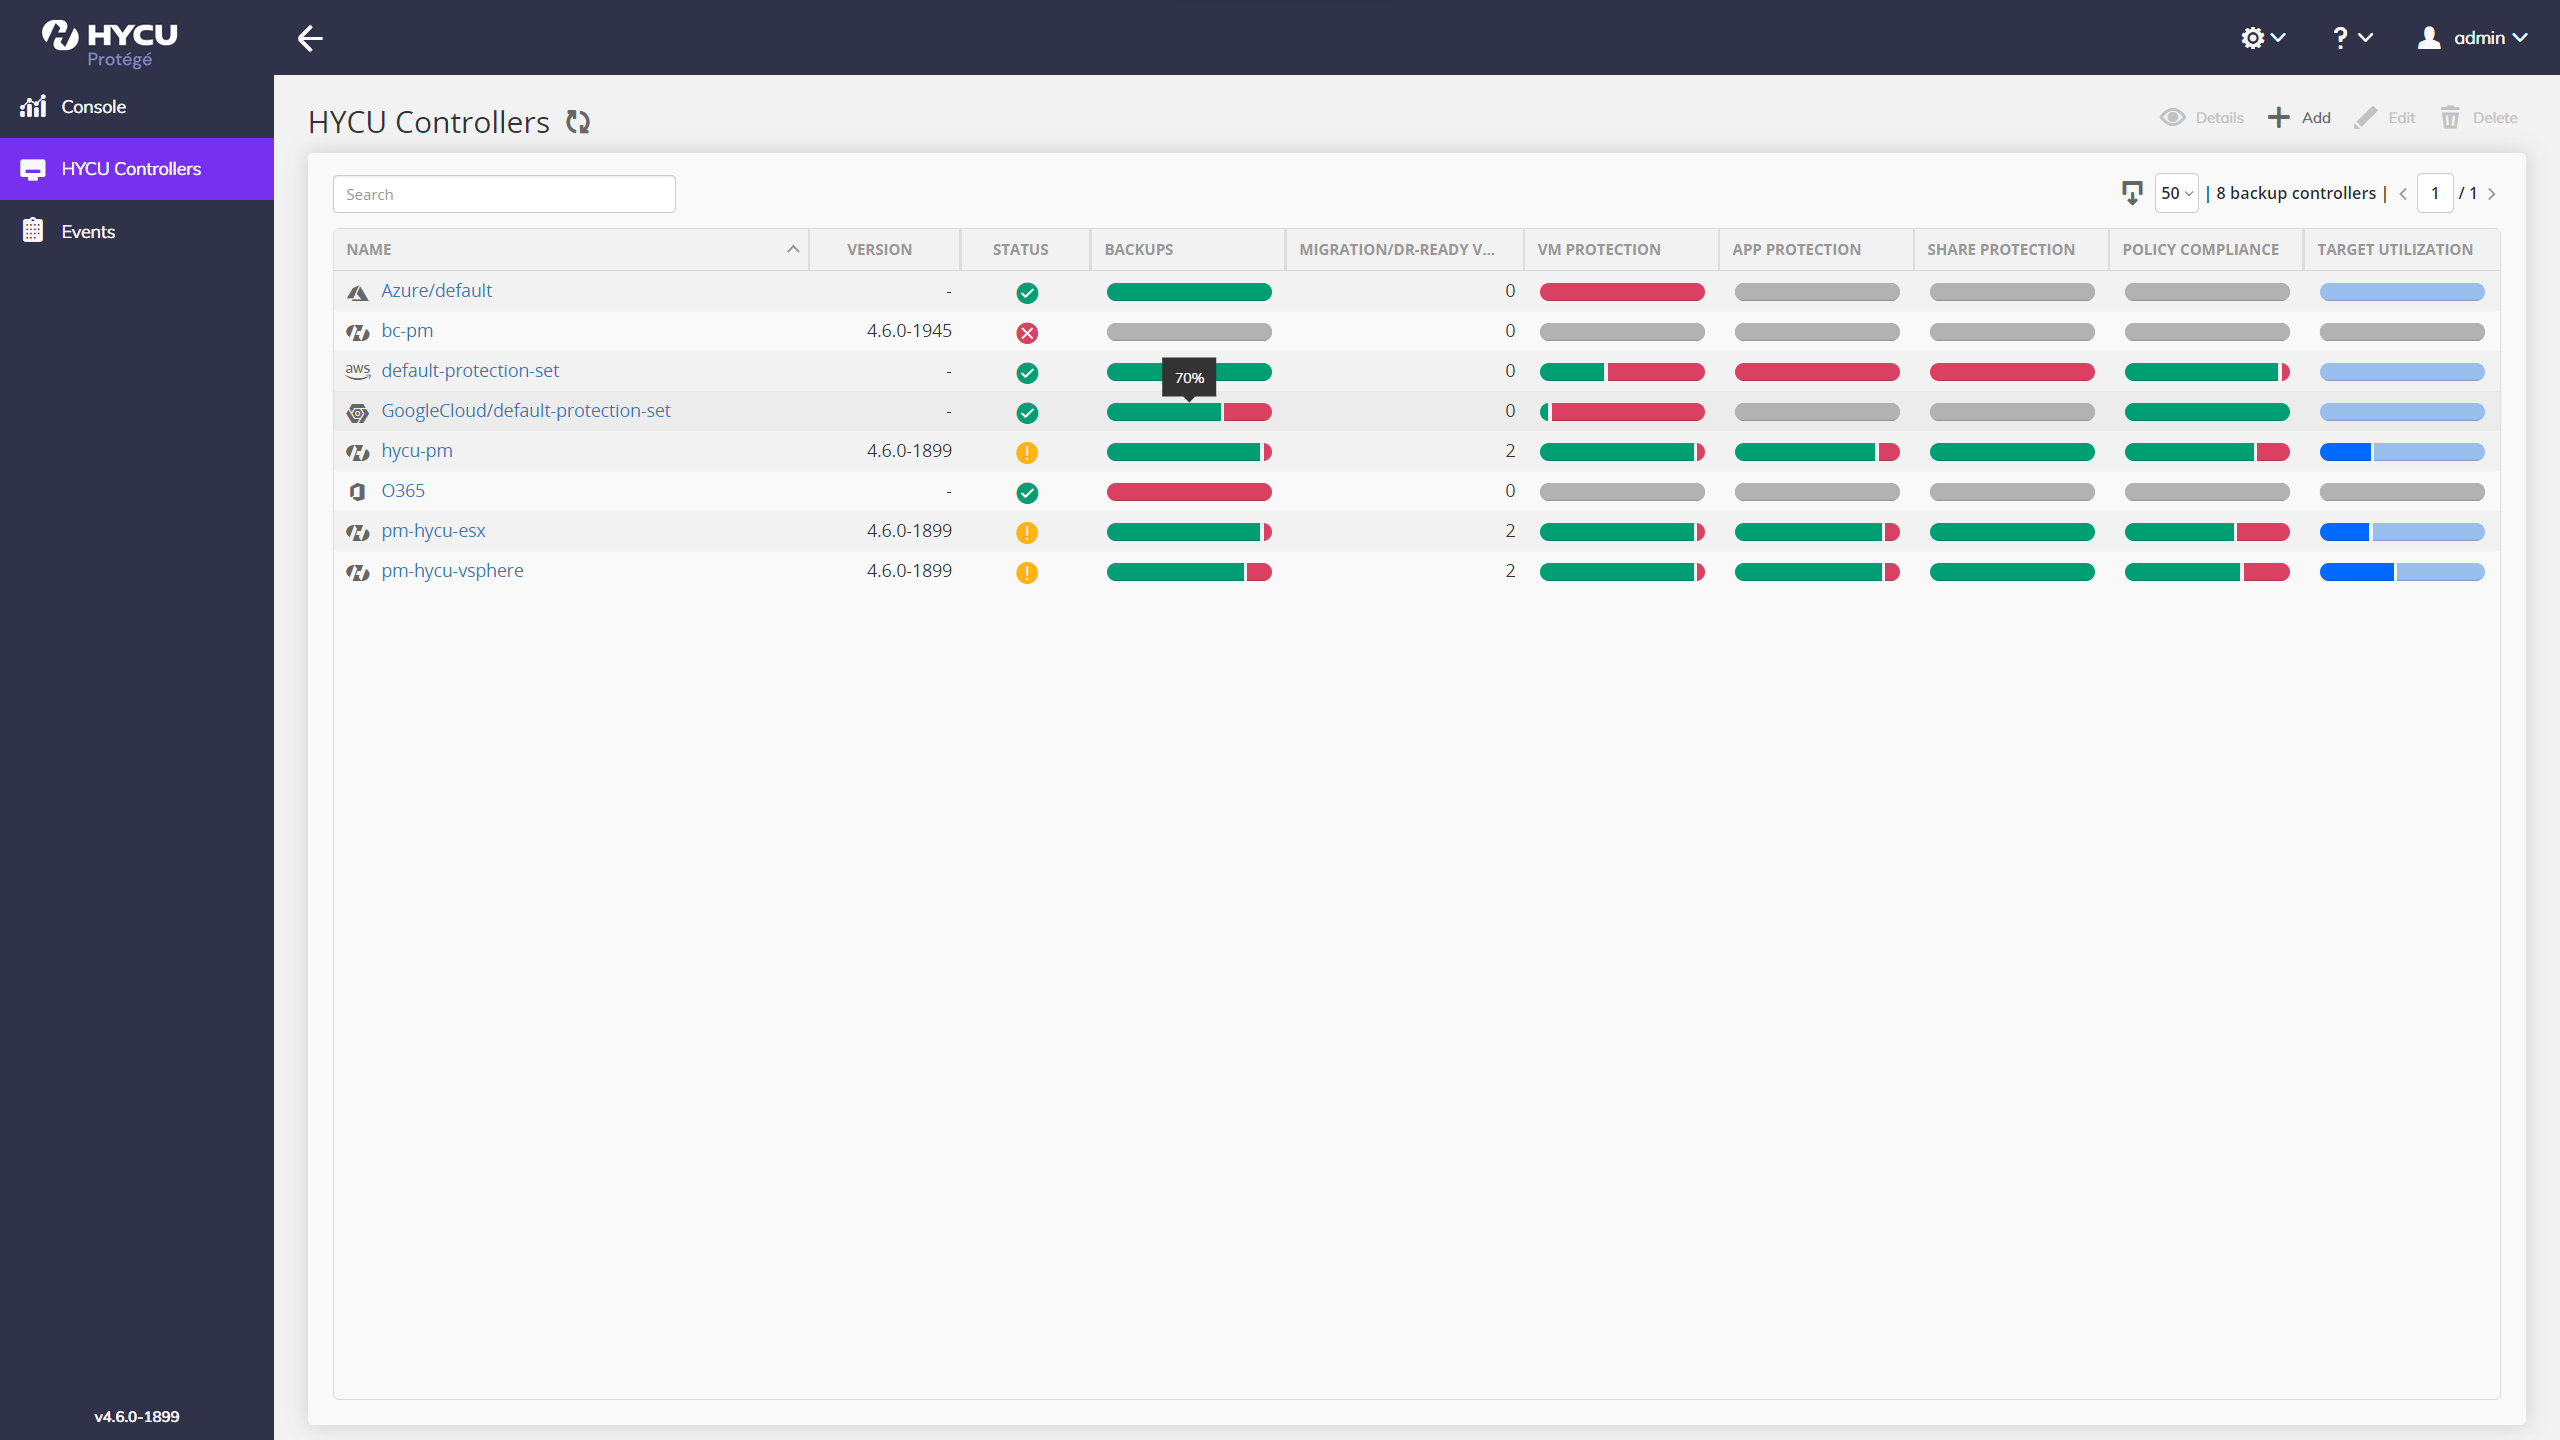 HYCU Protégé's controller dashboard provides  a quick view of protection status for each data source. Quick access to each module enables users to easily make changes to specific data protection policies.